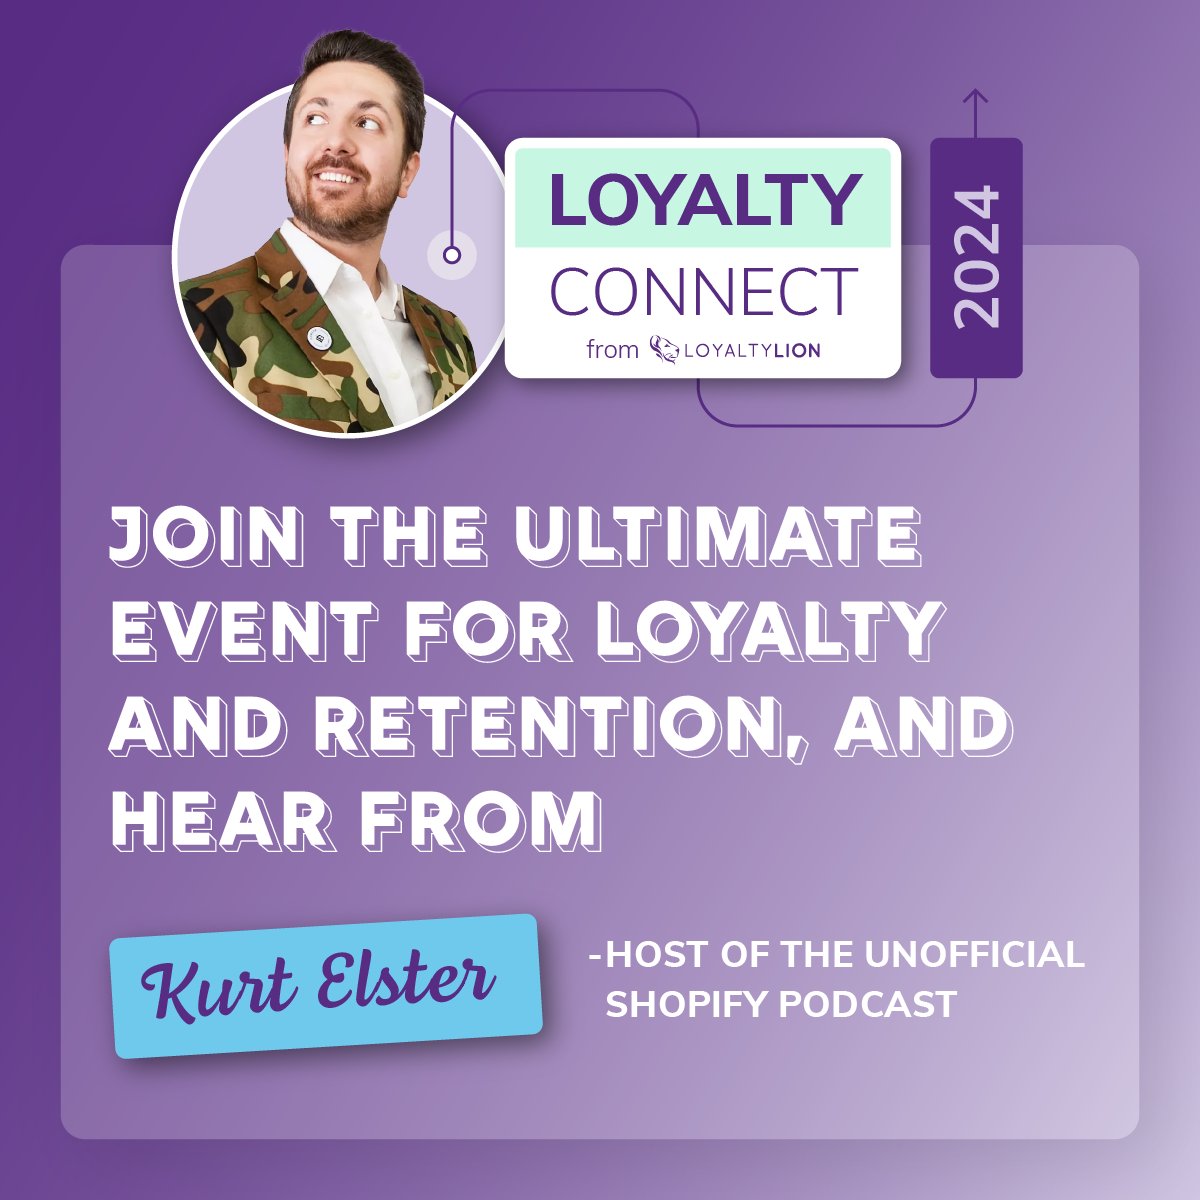 With #LoyaltyConnect around the corner, we'd like to introduce you to this year's keynote speaker - Shopify expert Kurt Elster!

Grab your free ticket and check out the agenda here 👇

hubs.la/Q02vQCCr0

#LoyaltyConnect #Ecommerce #Retention #Loyalty #LoyaltyProgram